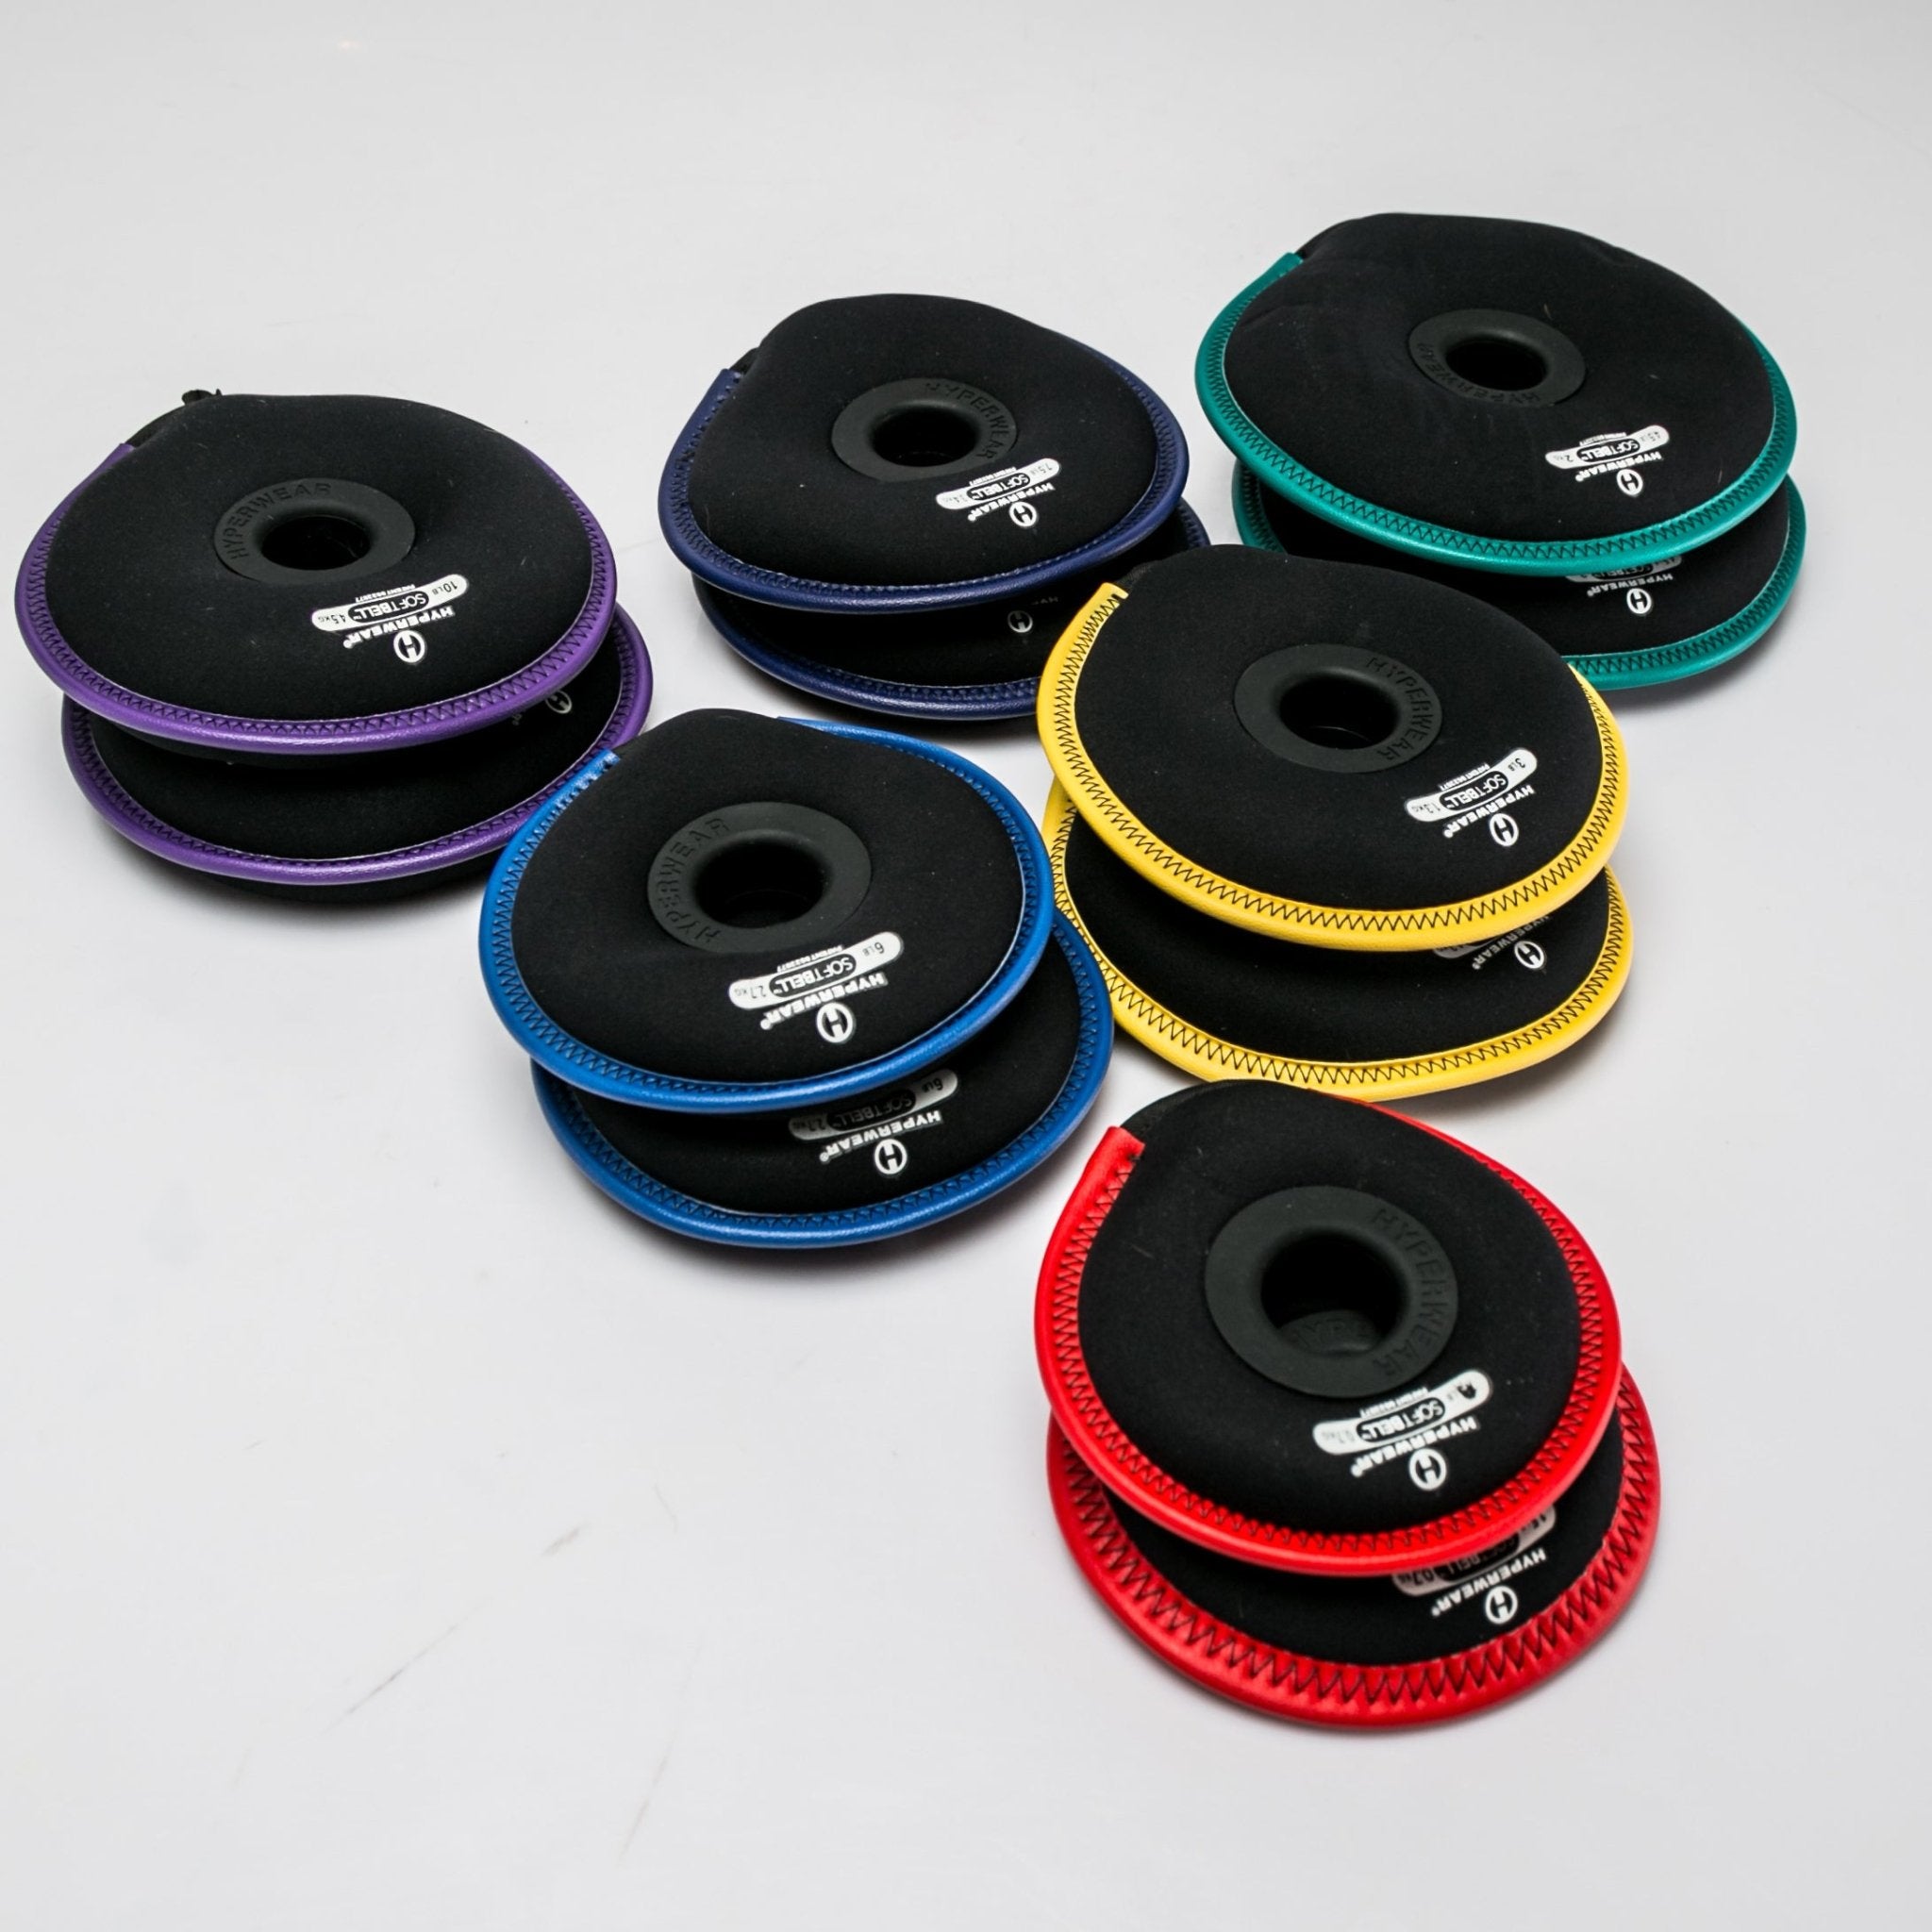 Group product image of an assortment of SoftBell hand weight plates arranged in pairs by color